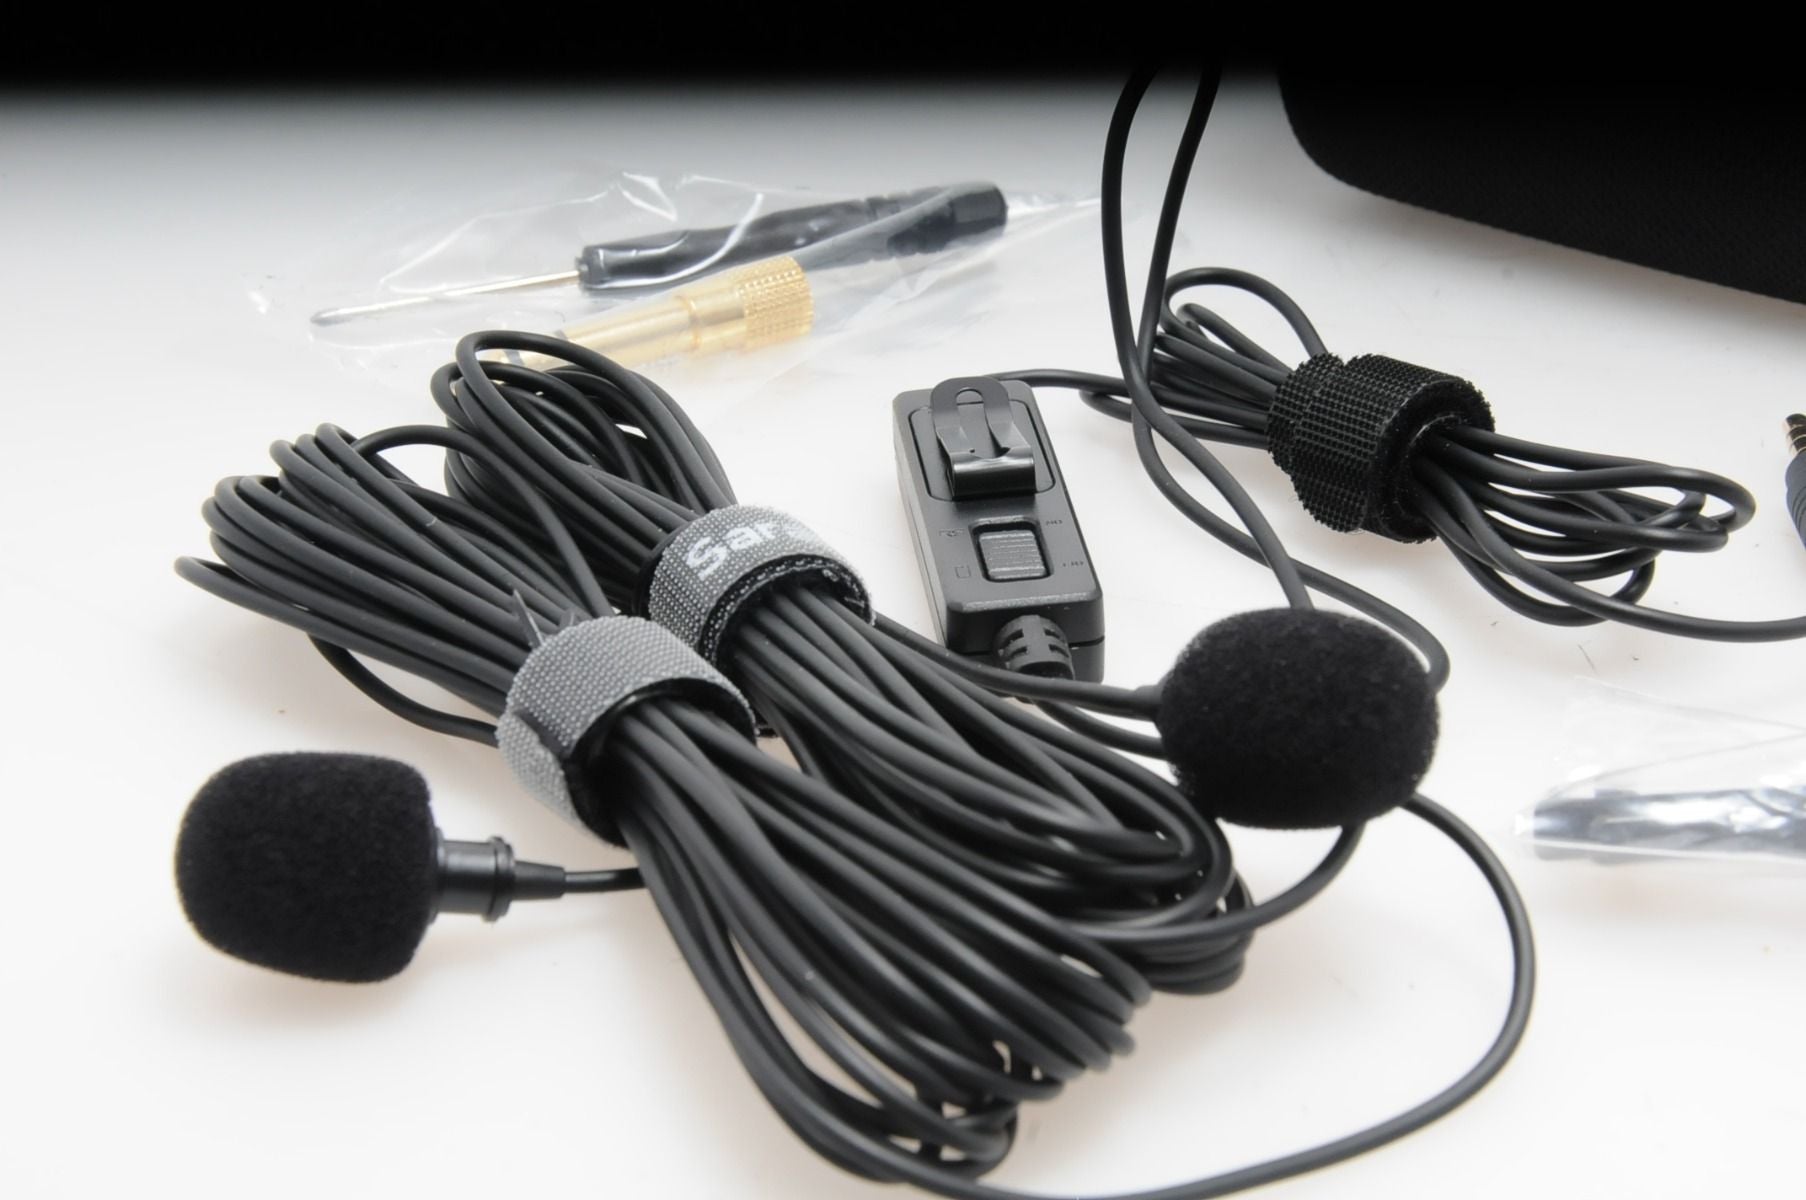 Used Saramonic Lavalier Microphone for DSLR cameras (Boxed SH36706)